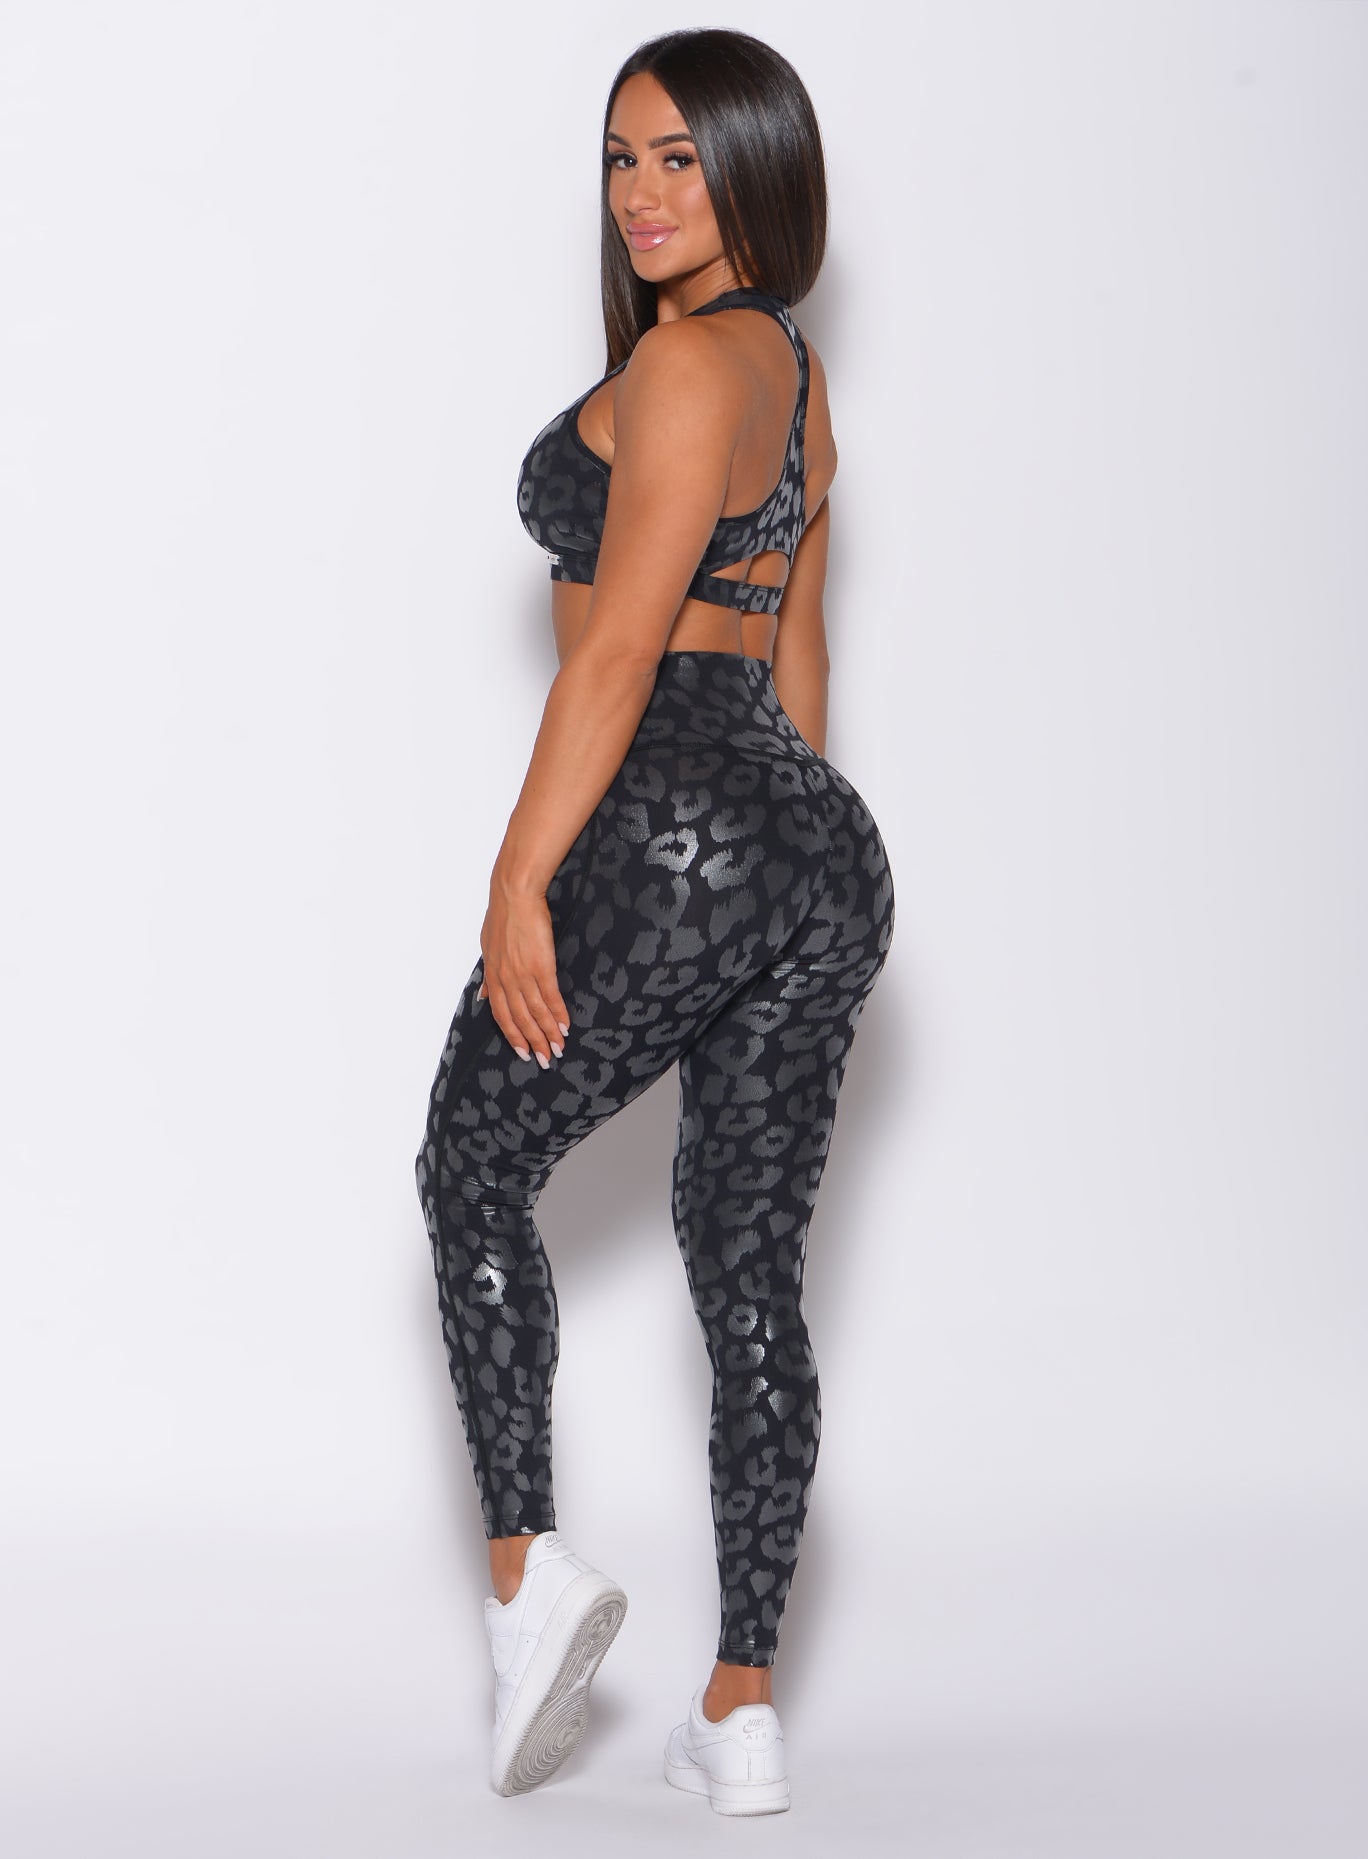 left side profile view of a model wearing our shine leopard leggings in Black Leopard color along with the matching sports bra 